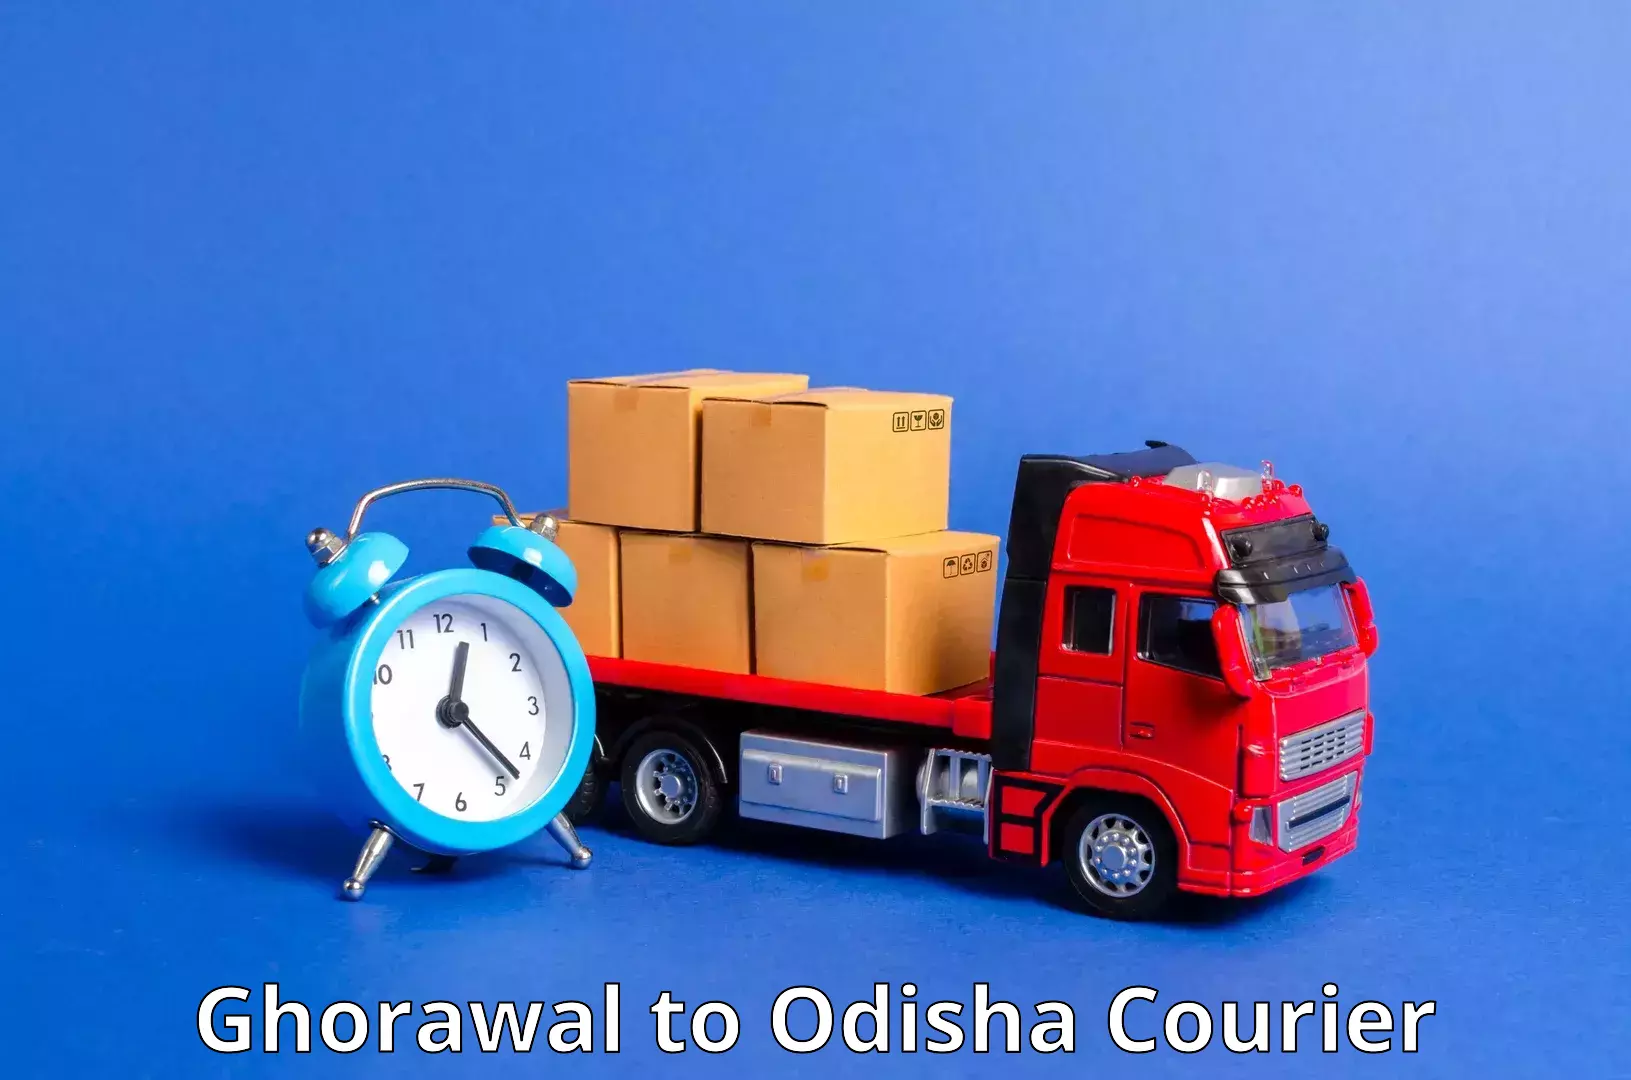 Courier service innovation Ghorawal to Odisha